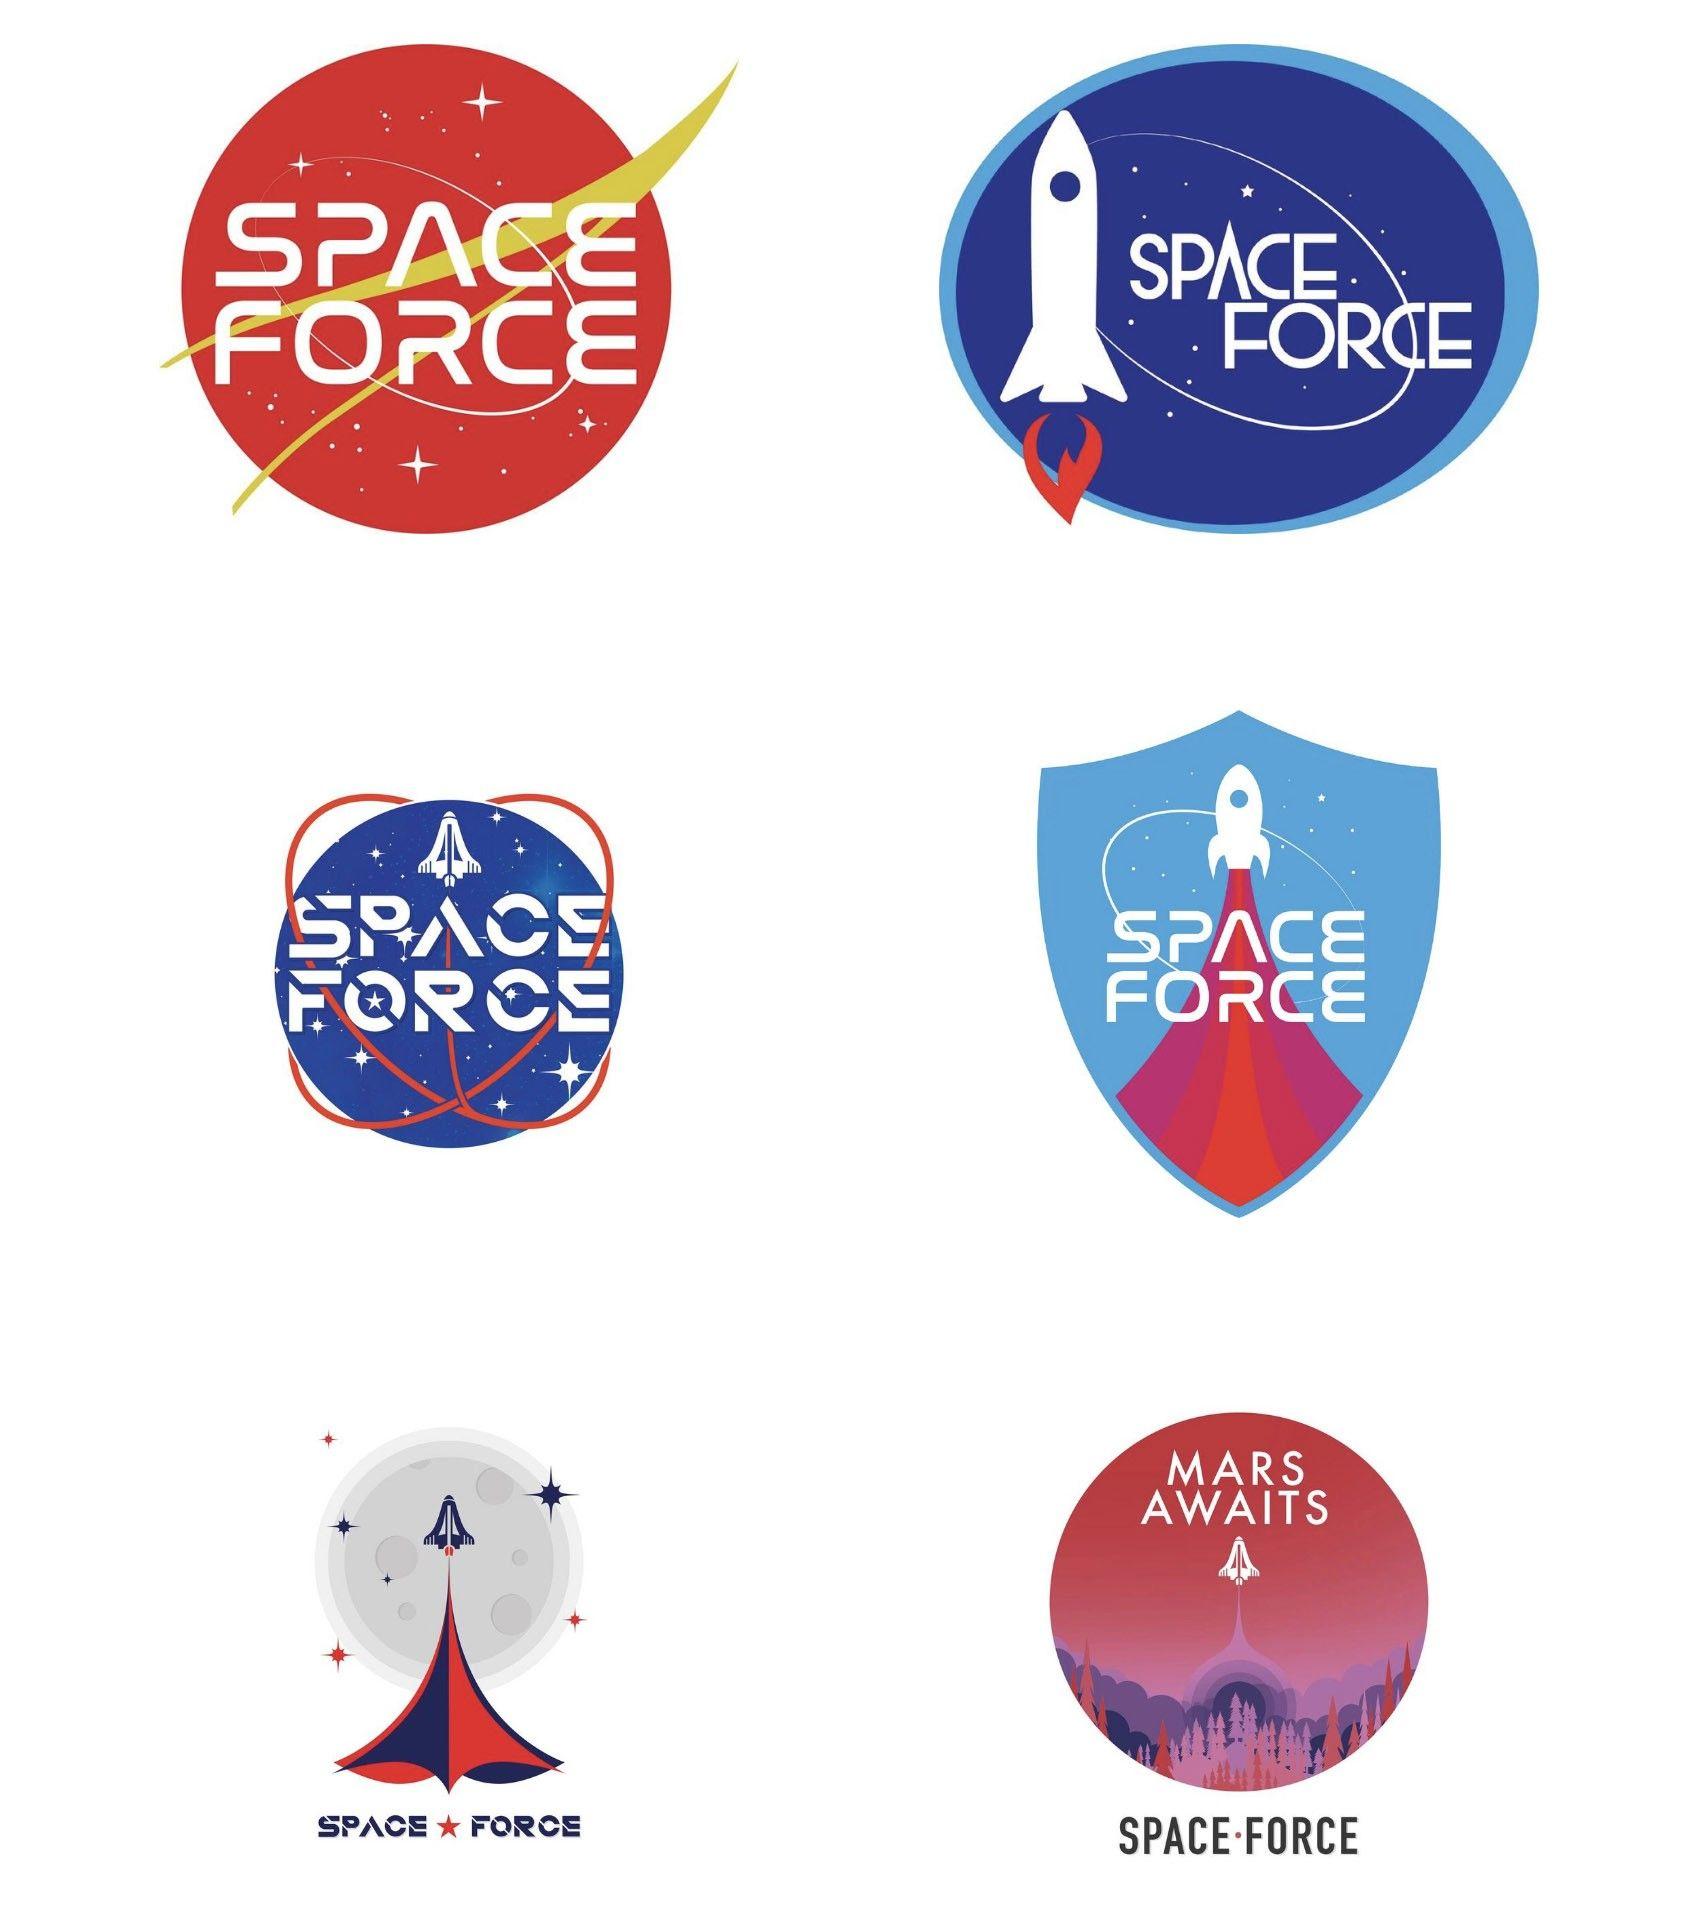 Vote Logo - Trump 2020 campaign asks supporters vote on logo for Space Force merch